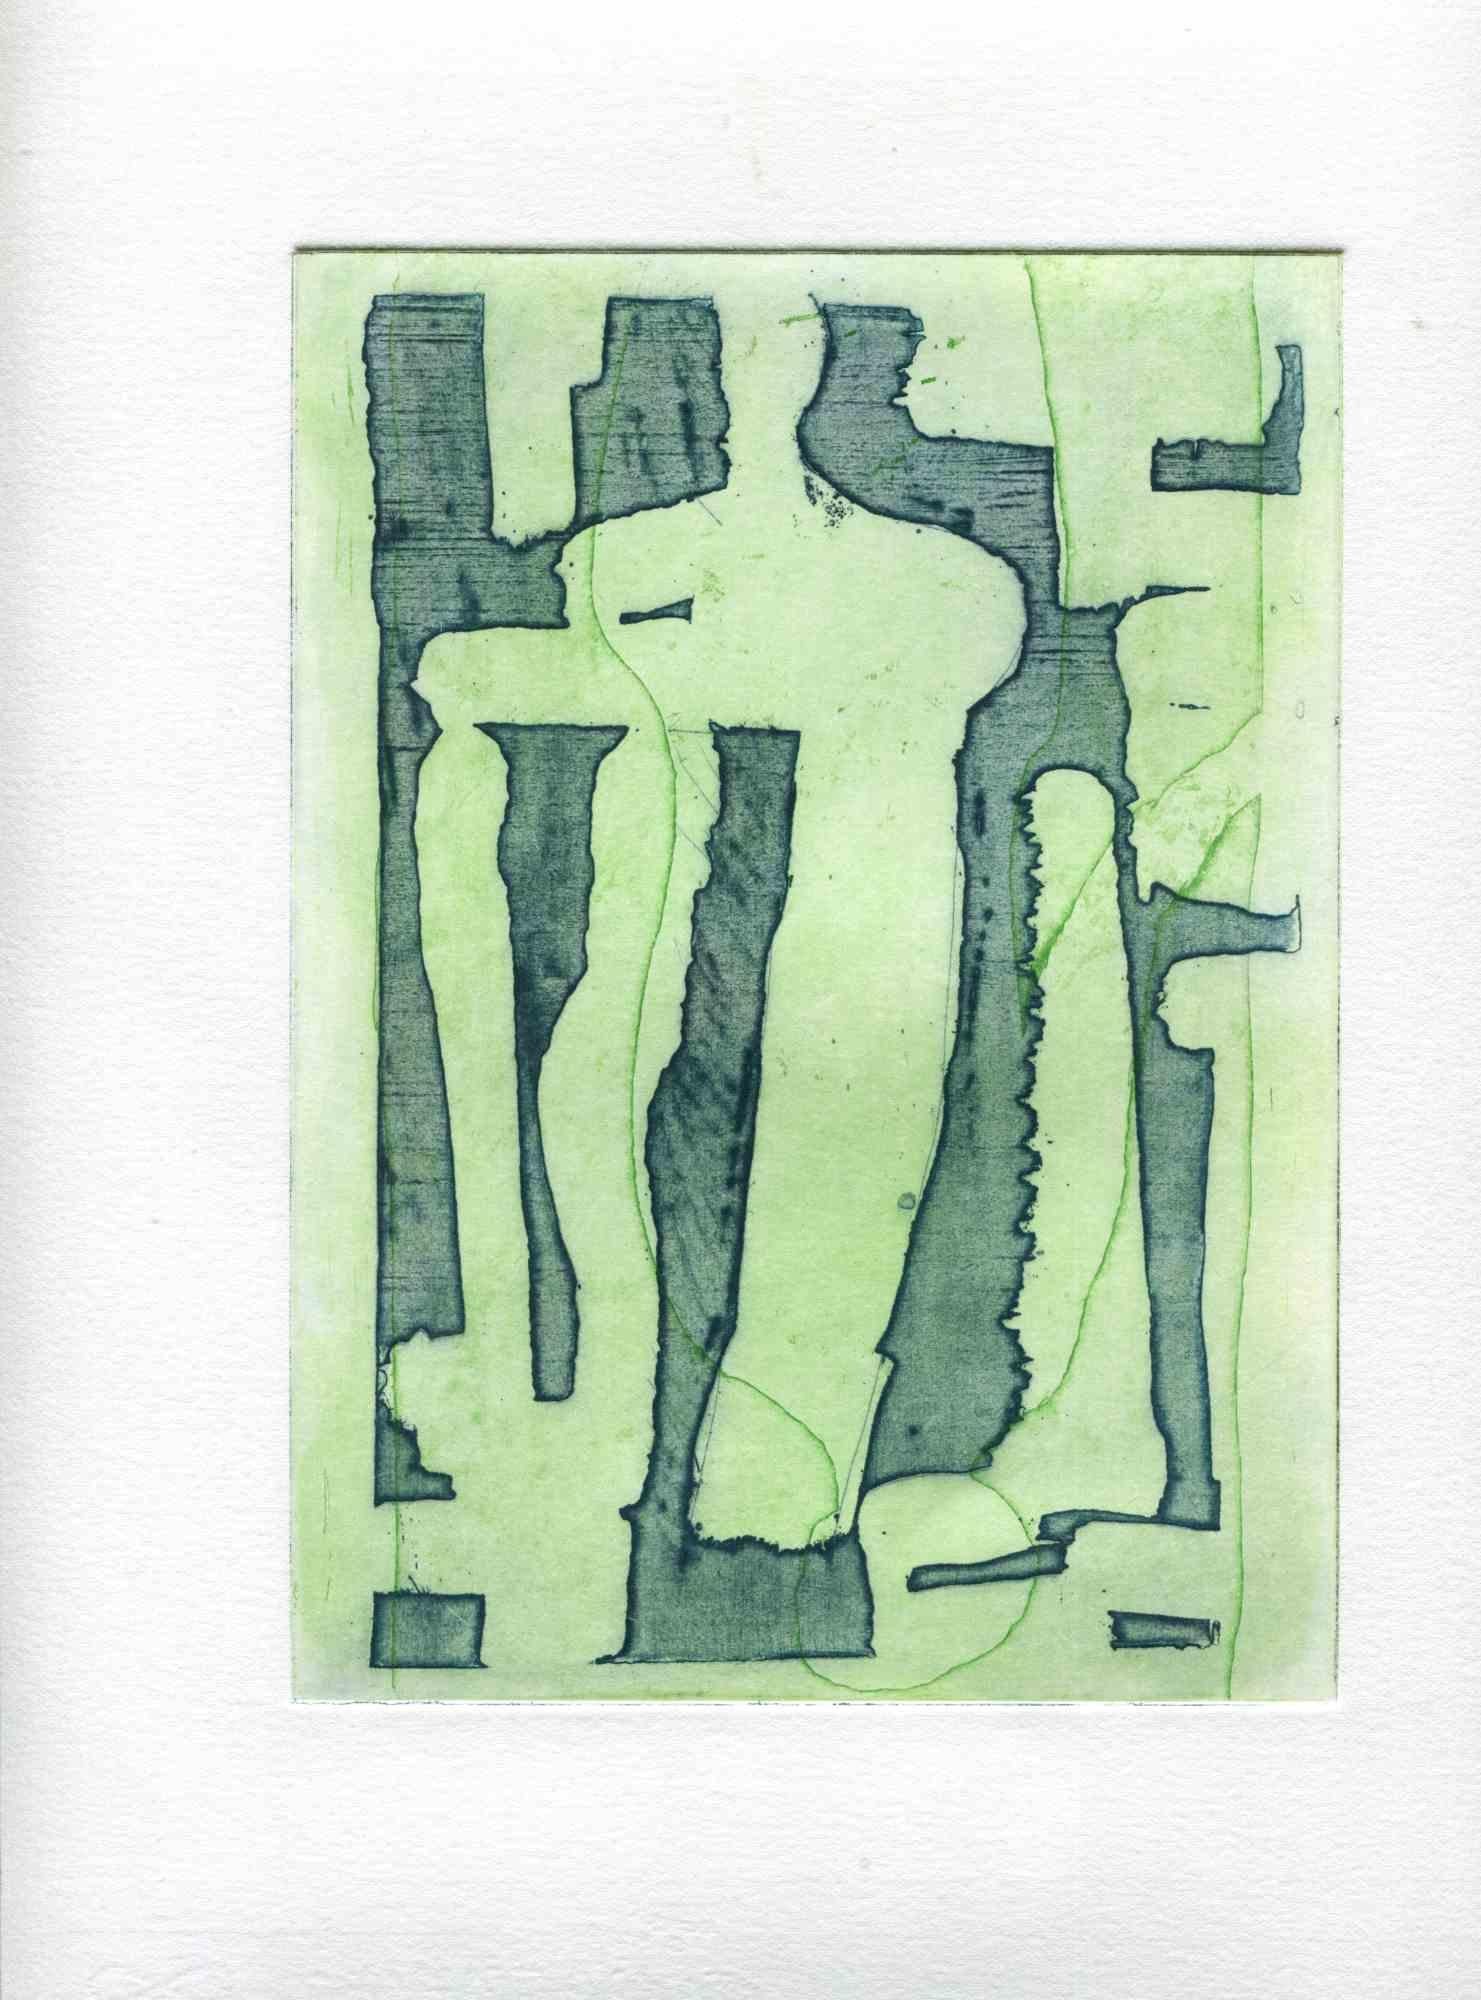 Unknown Abstract Print - Composition - Original Lithograph on Paper - Mid-20th Century